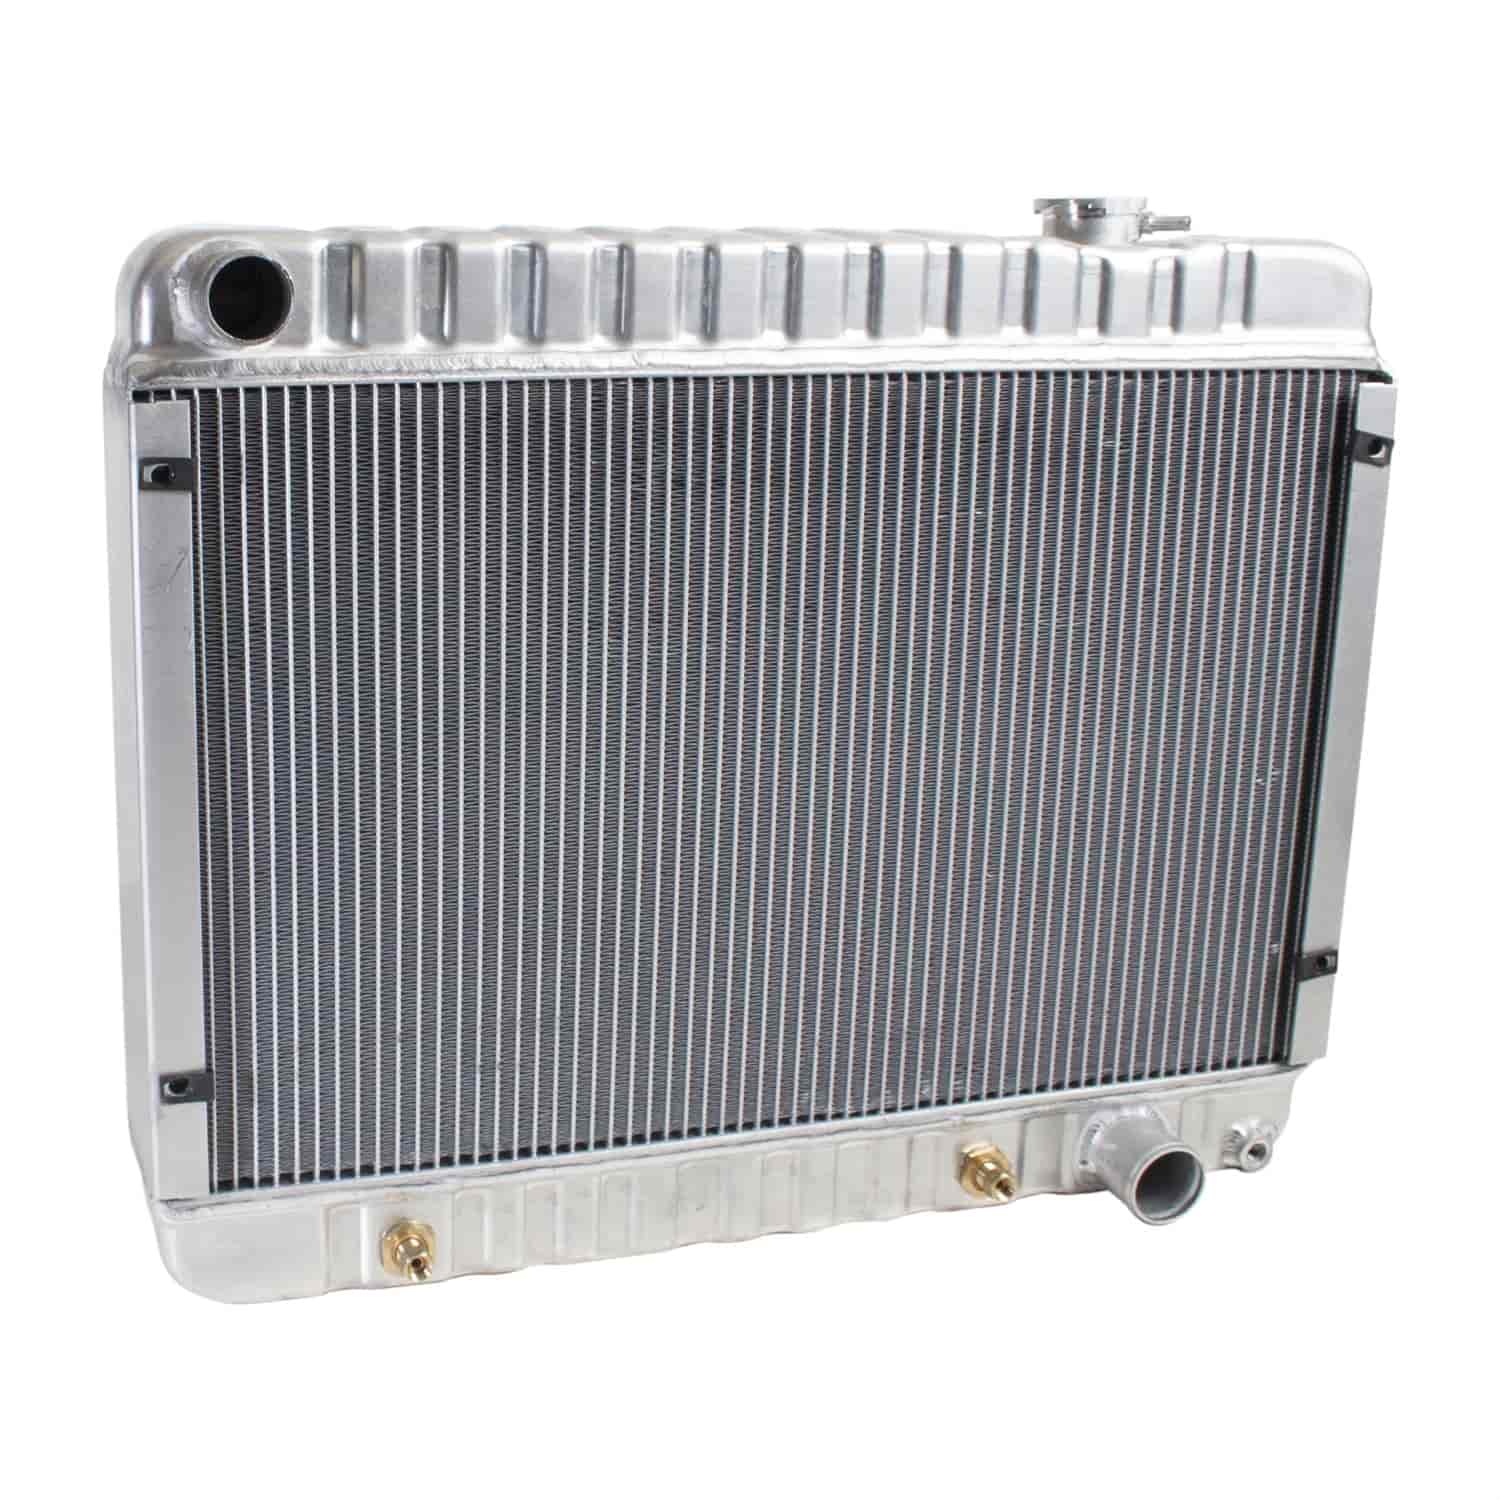 ExactFit Radiator for 1962-1967 Chevy II Non-Factory A/C